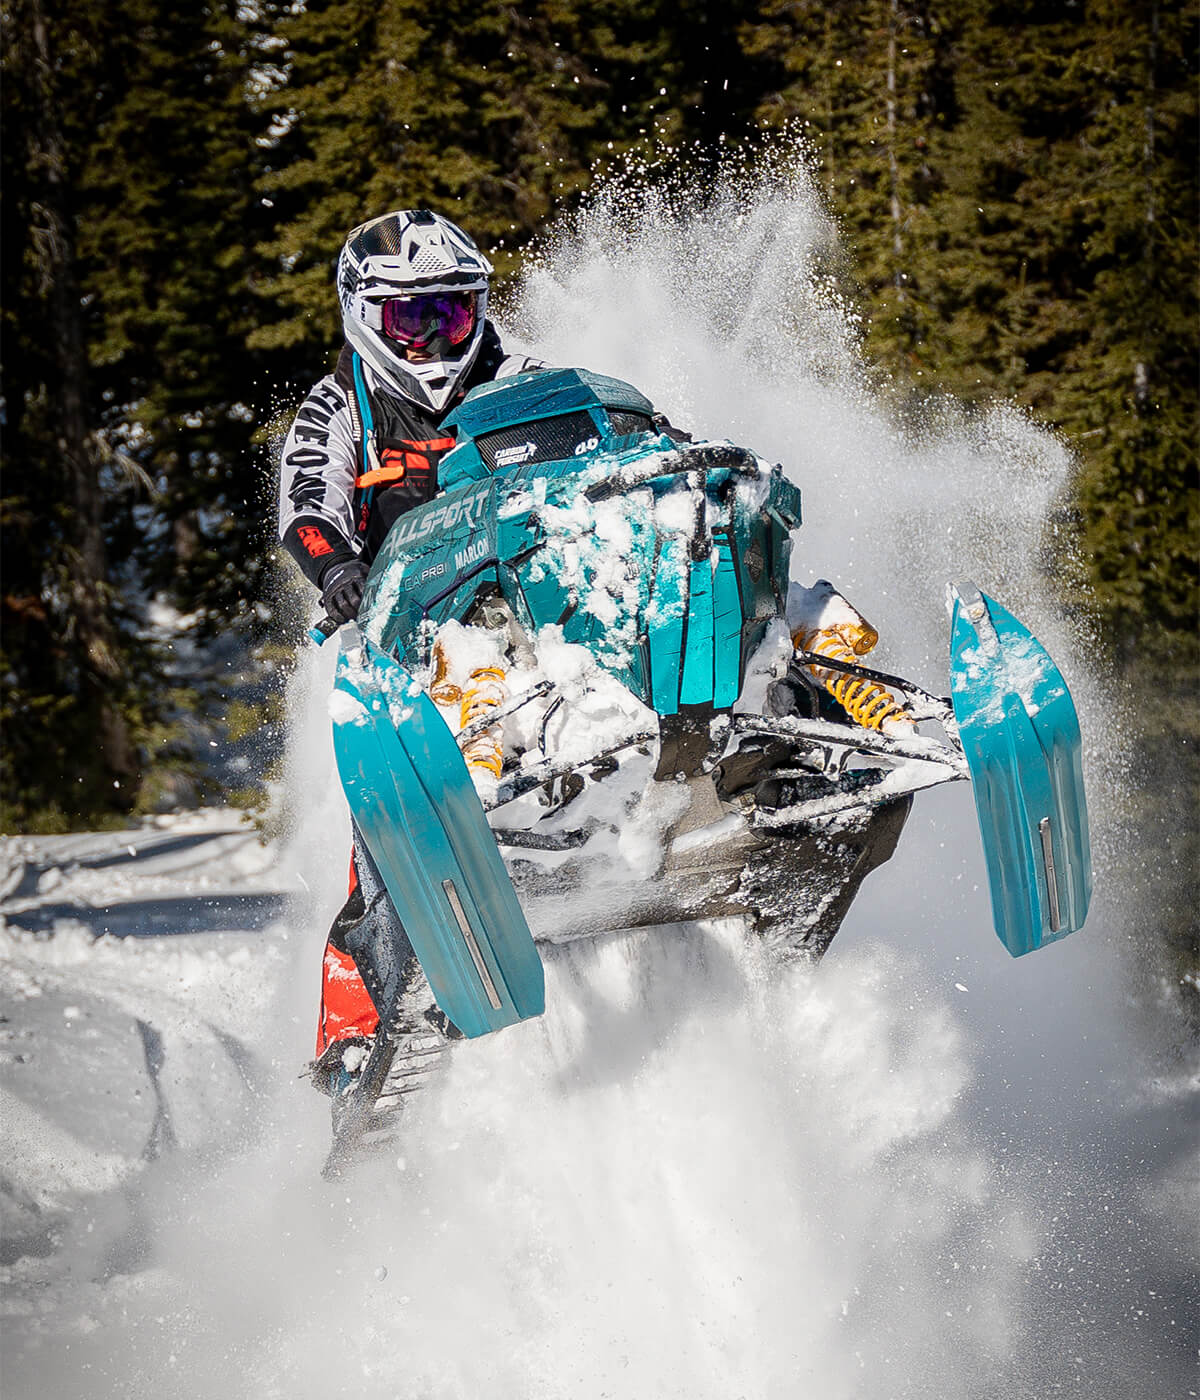 C&A Pro backcountry rider Scott Eyer on a snowmobile in the mountains with Sky Blue TMX mountain skis with gray handles